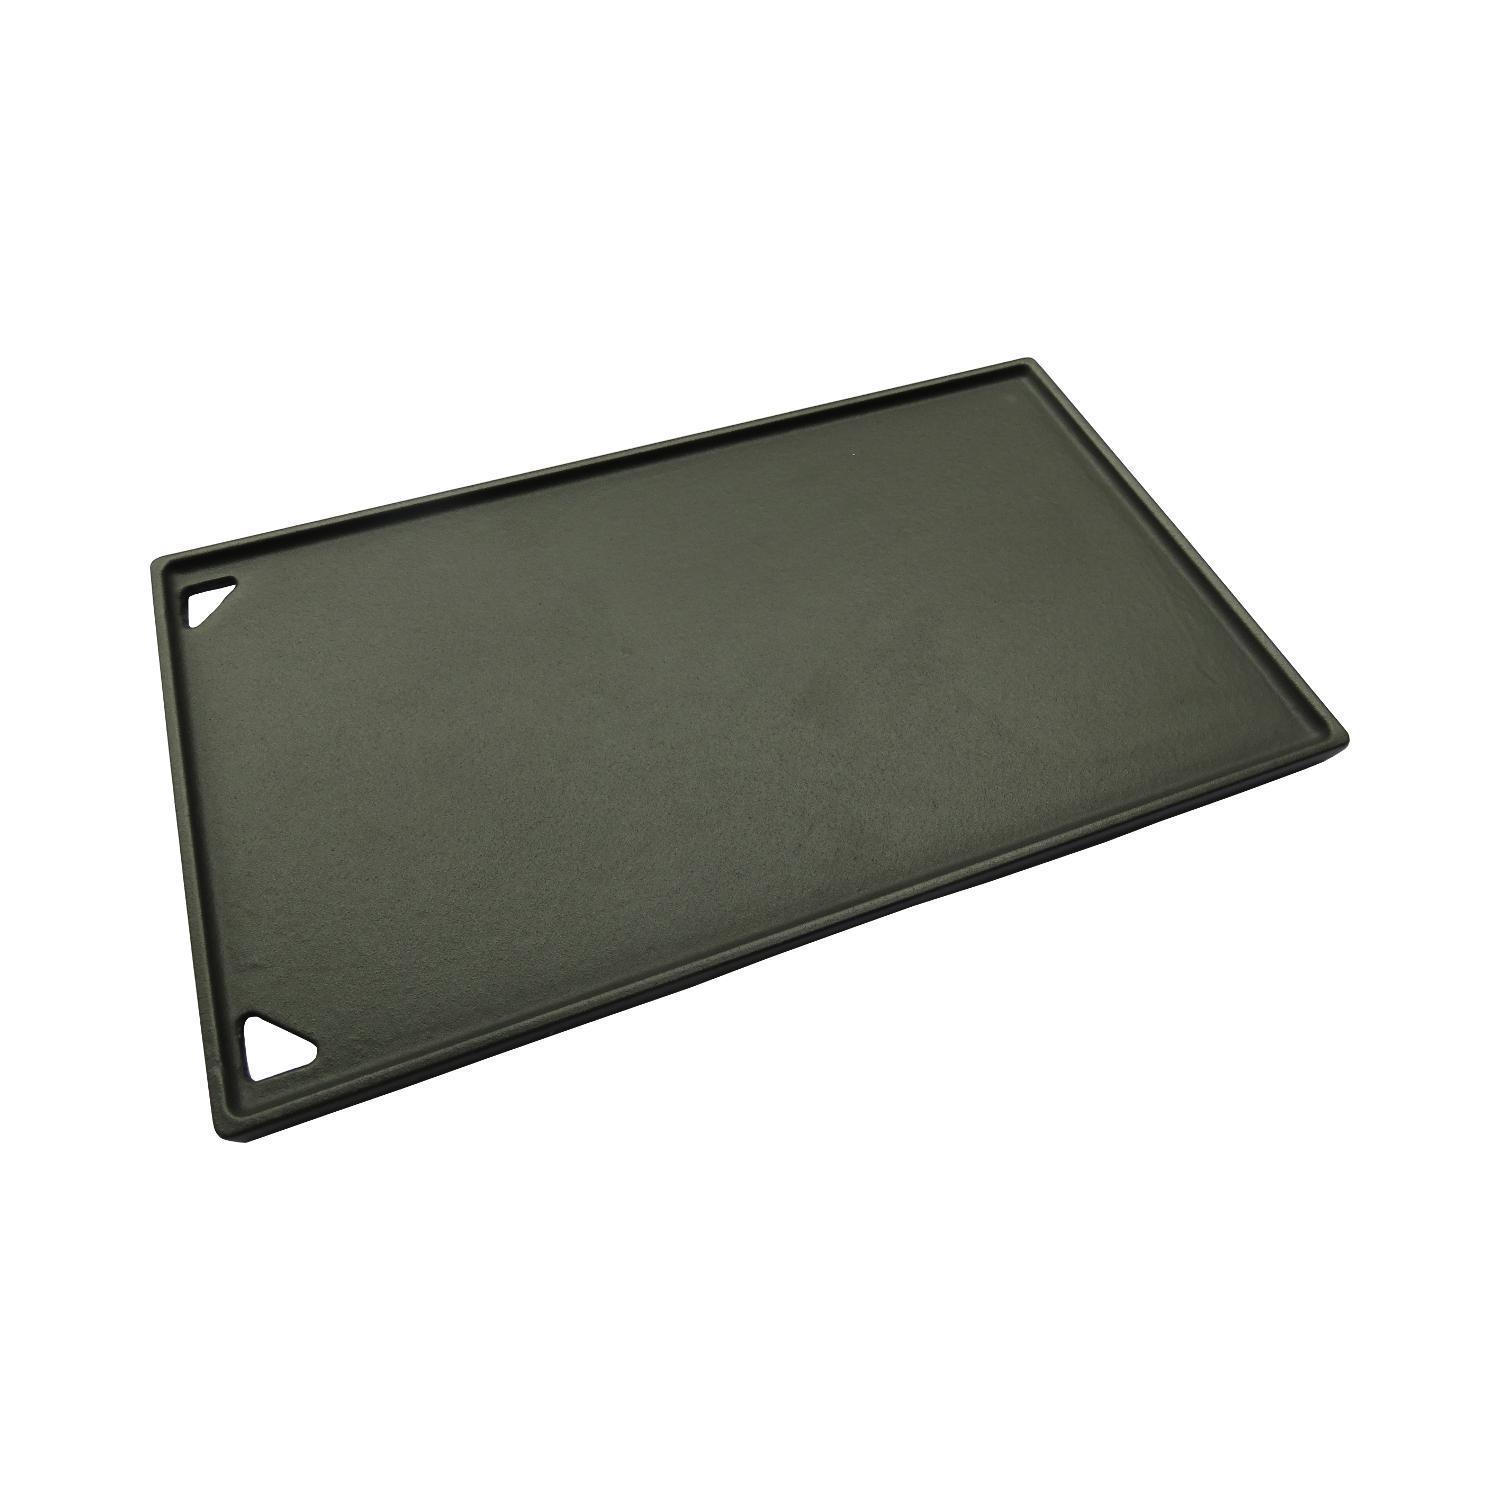 Everdure Grill Accessories Everdure By Heston Blumenthal Center Flat Plate For FURNACE 52-Inch Propane Grill